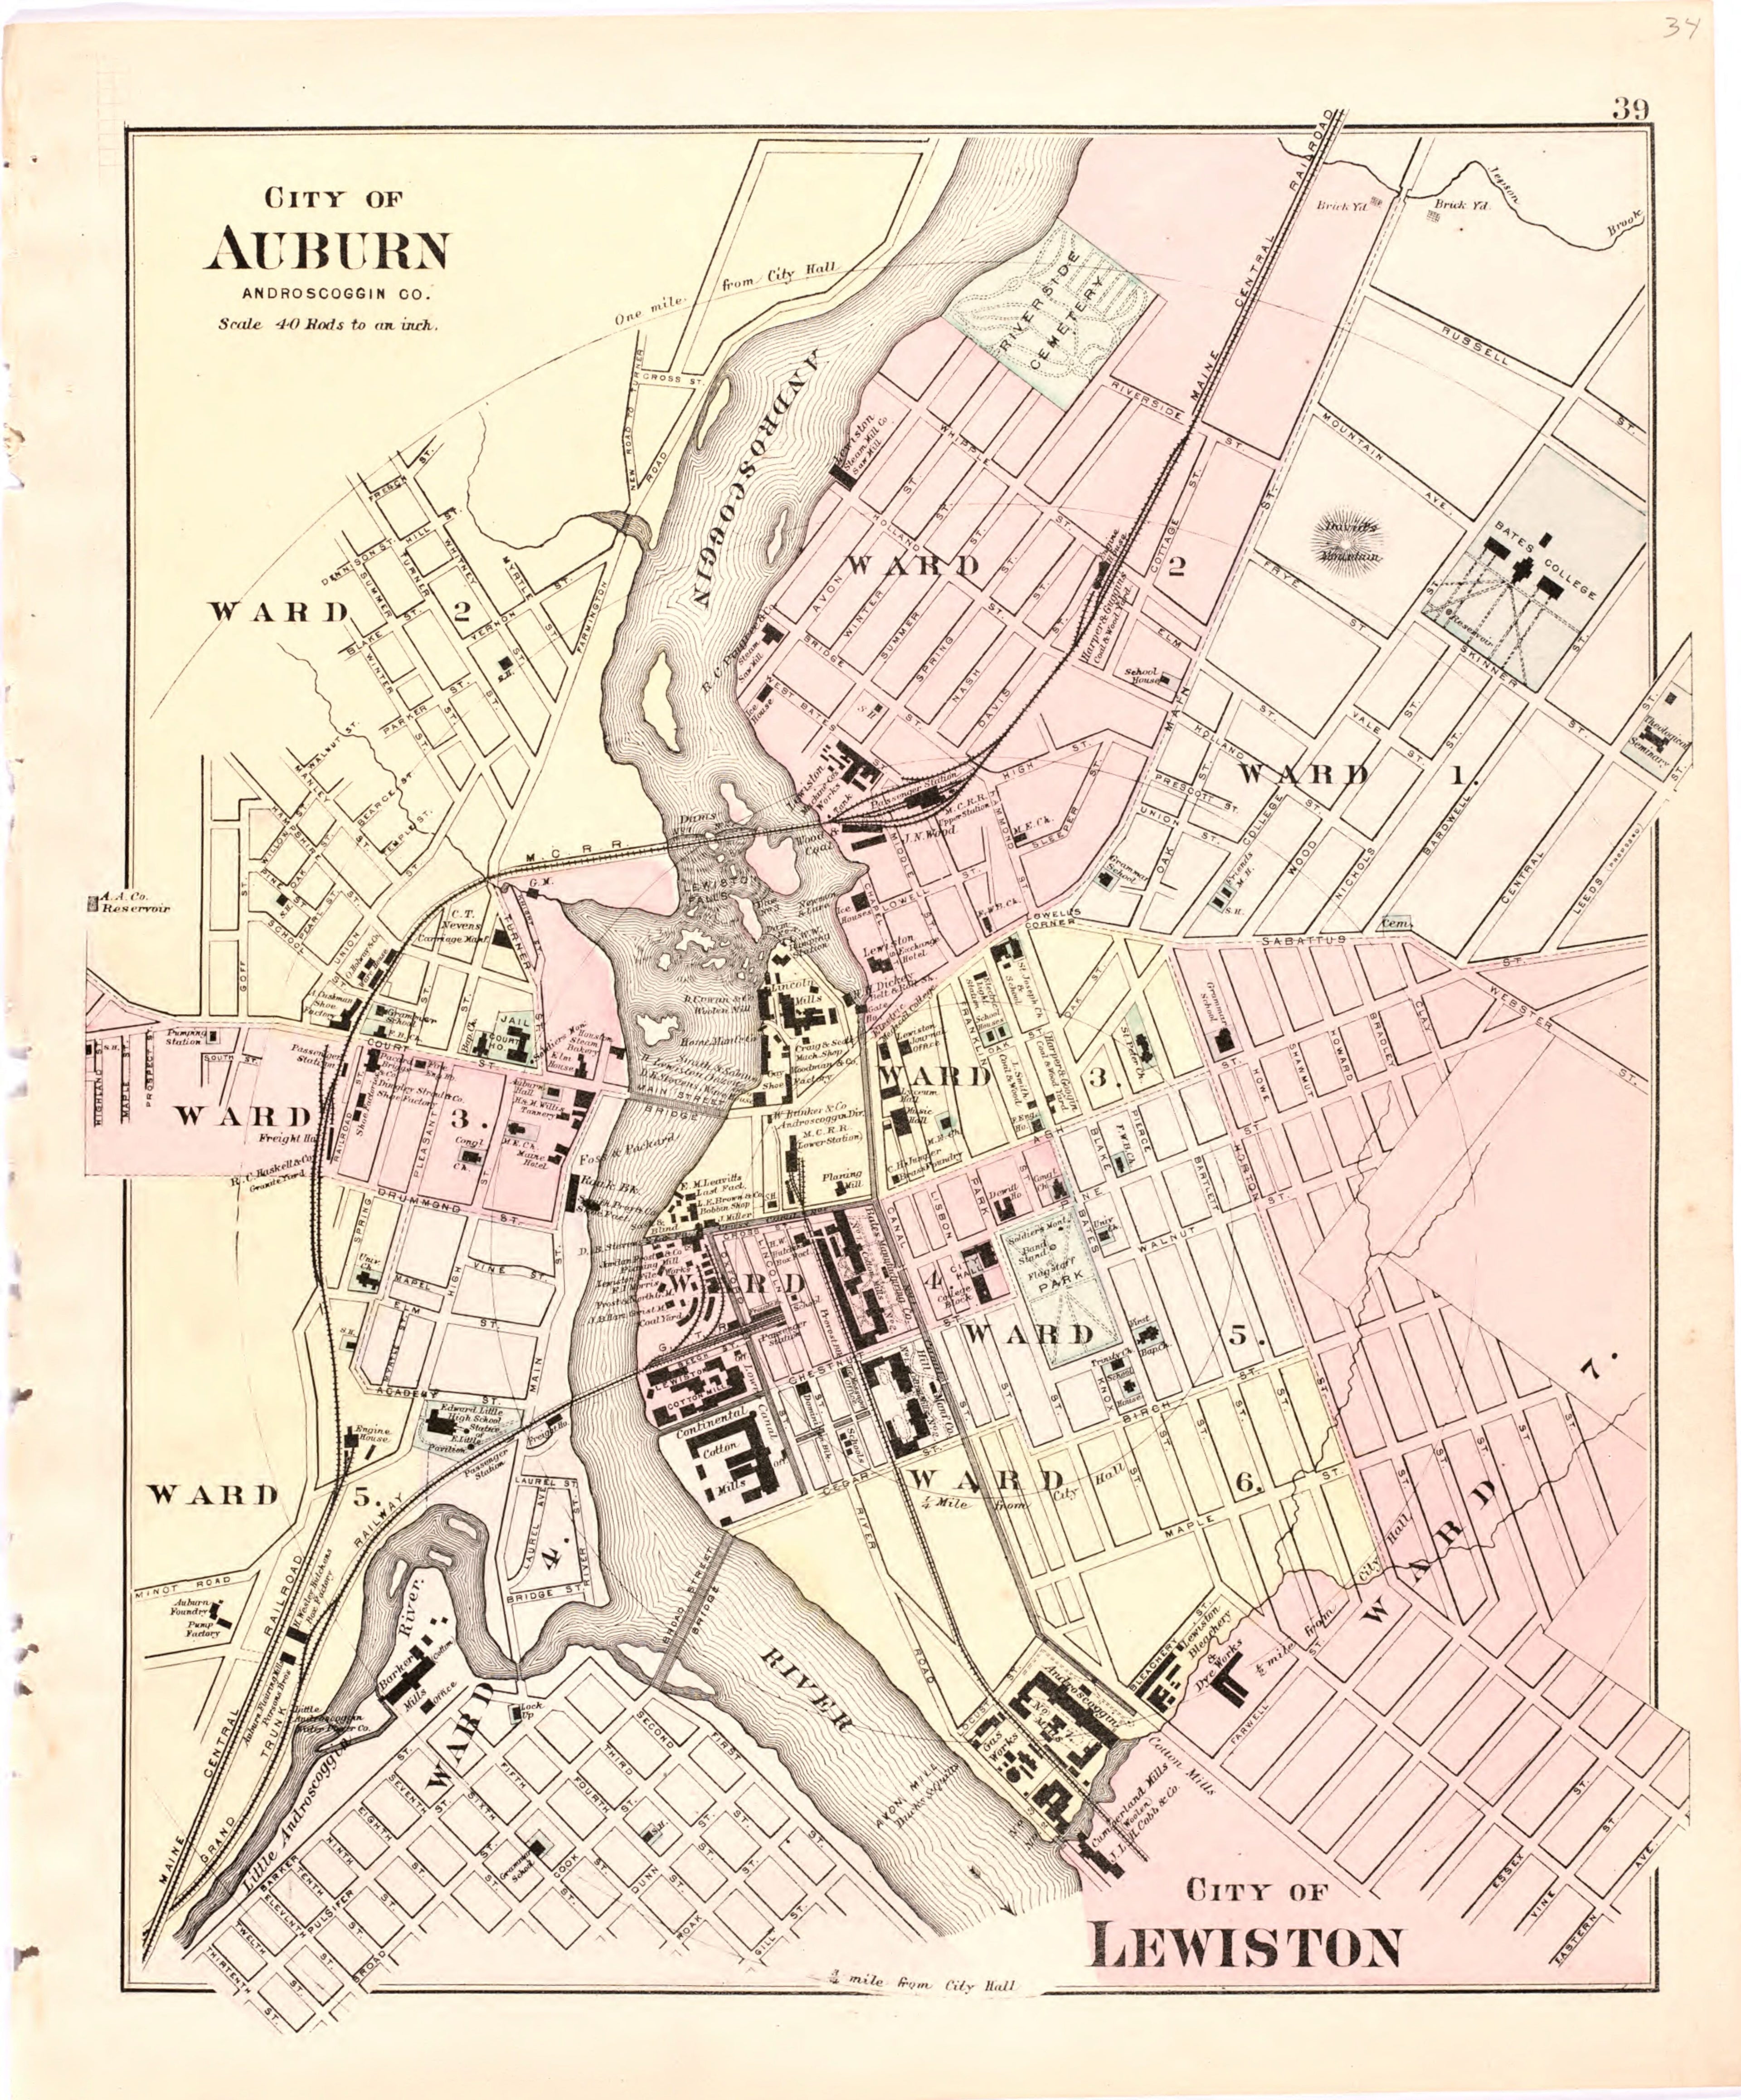 This hand drawn illustration (map) of City of Auburn from Colby&